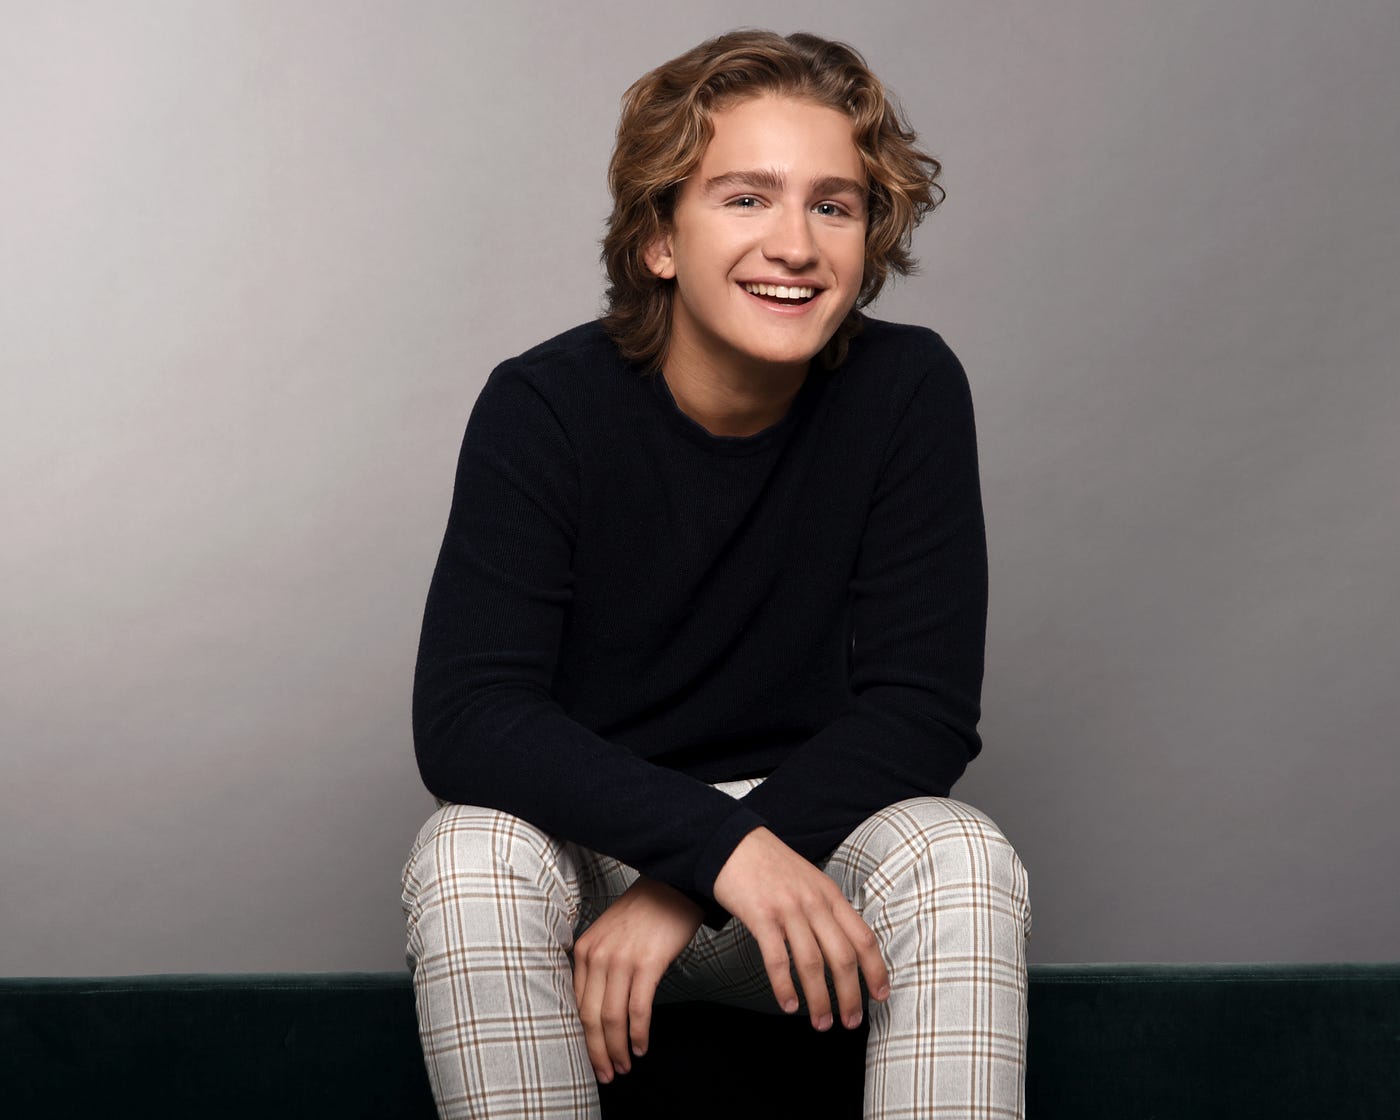 Rising Star Tait Blum On The Five Things You Need To Shine In The Entertainment Industry by Edward Sylvan CEO of Sycamore Entertainment Group Authority Magazine Medium